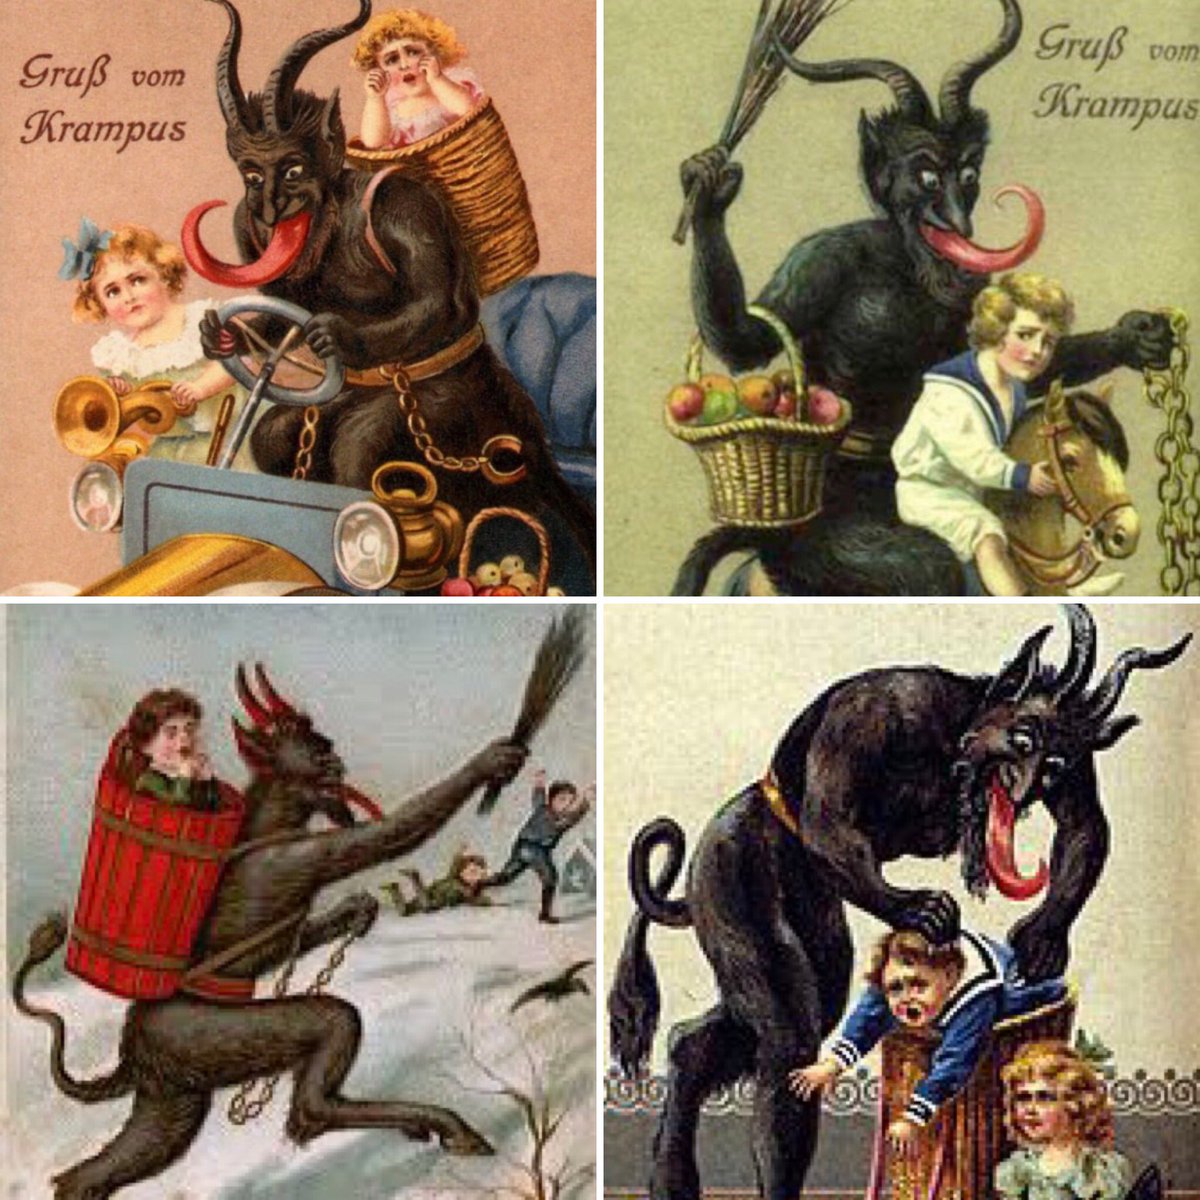 Hi all, a reminder that #FolkloreSunday is happening now, with the theme of: KRAMPUS & OTHER FRIGHTENING FIGURES! Bring your tweets to the hashtag for a retweet! See you soon! Maude xx